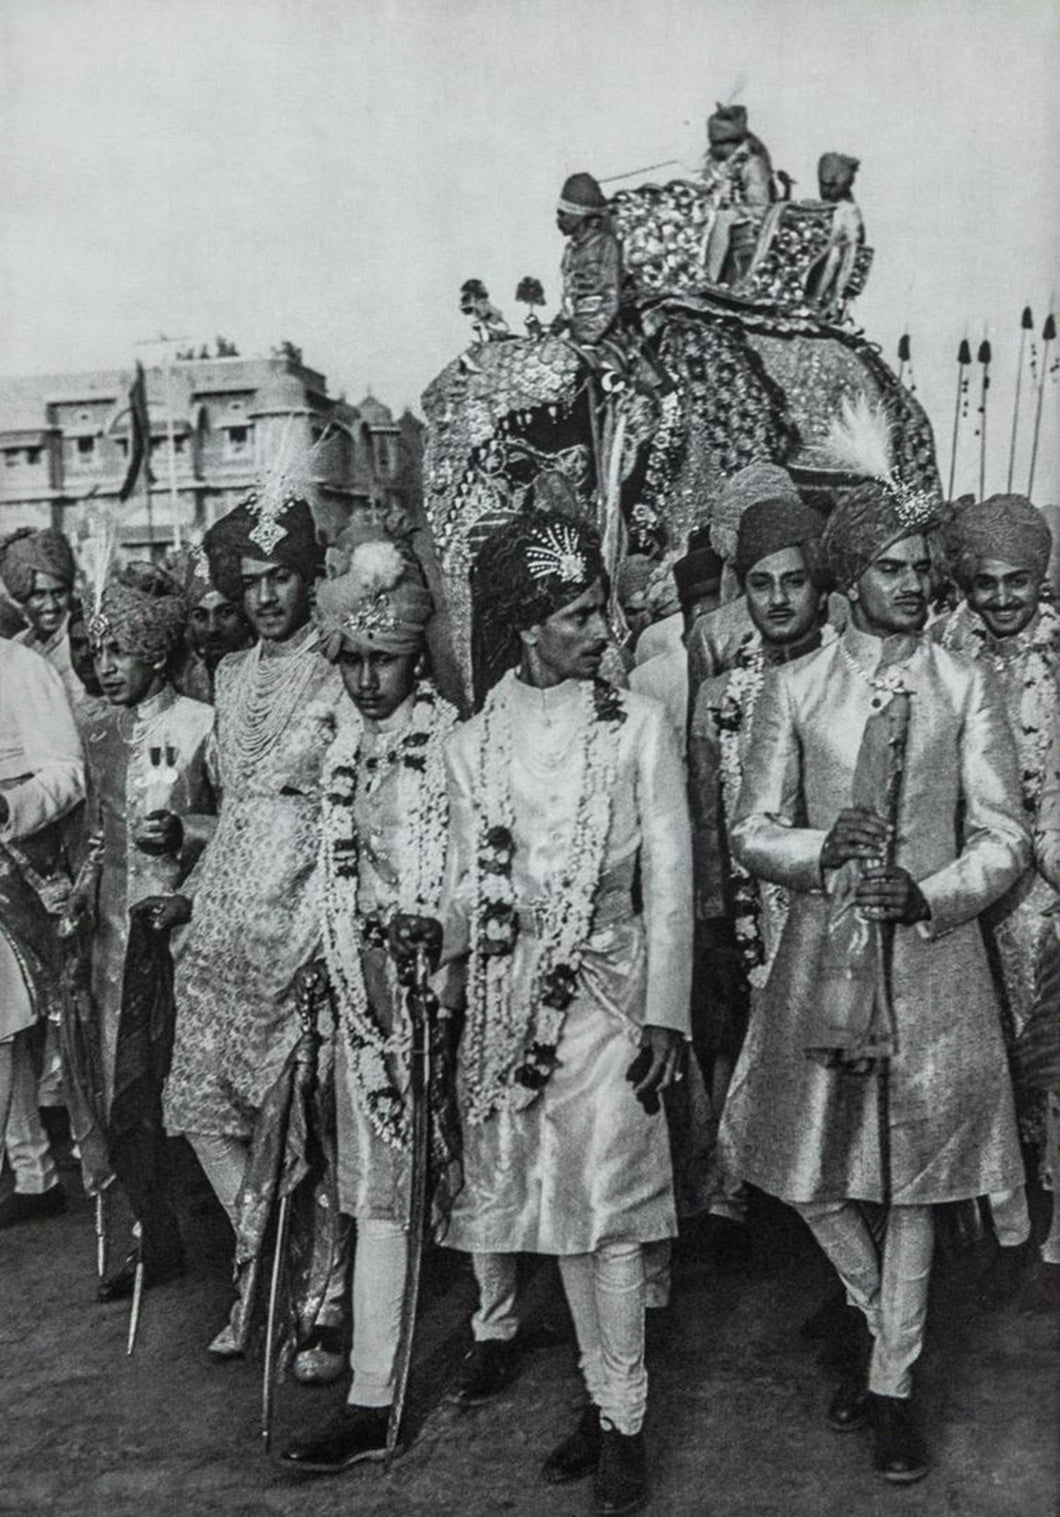 HENRI CARTIER-BRESSON (French, 1908-2004) Maharajah of Baria Arrives To Marry, Jaipur, 1948.